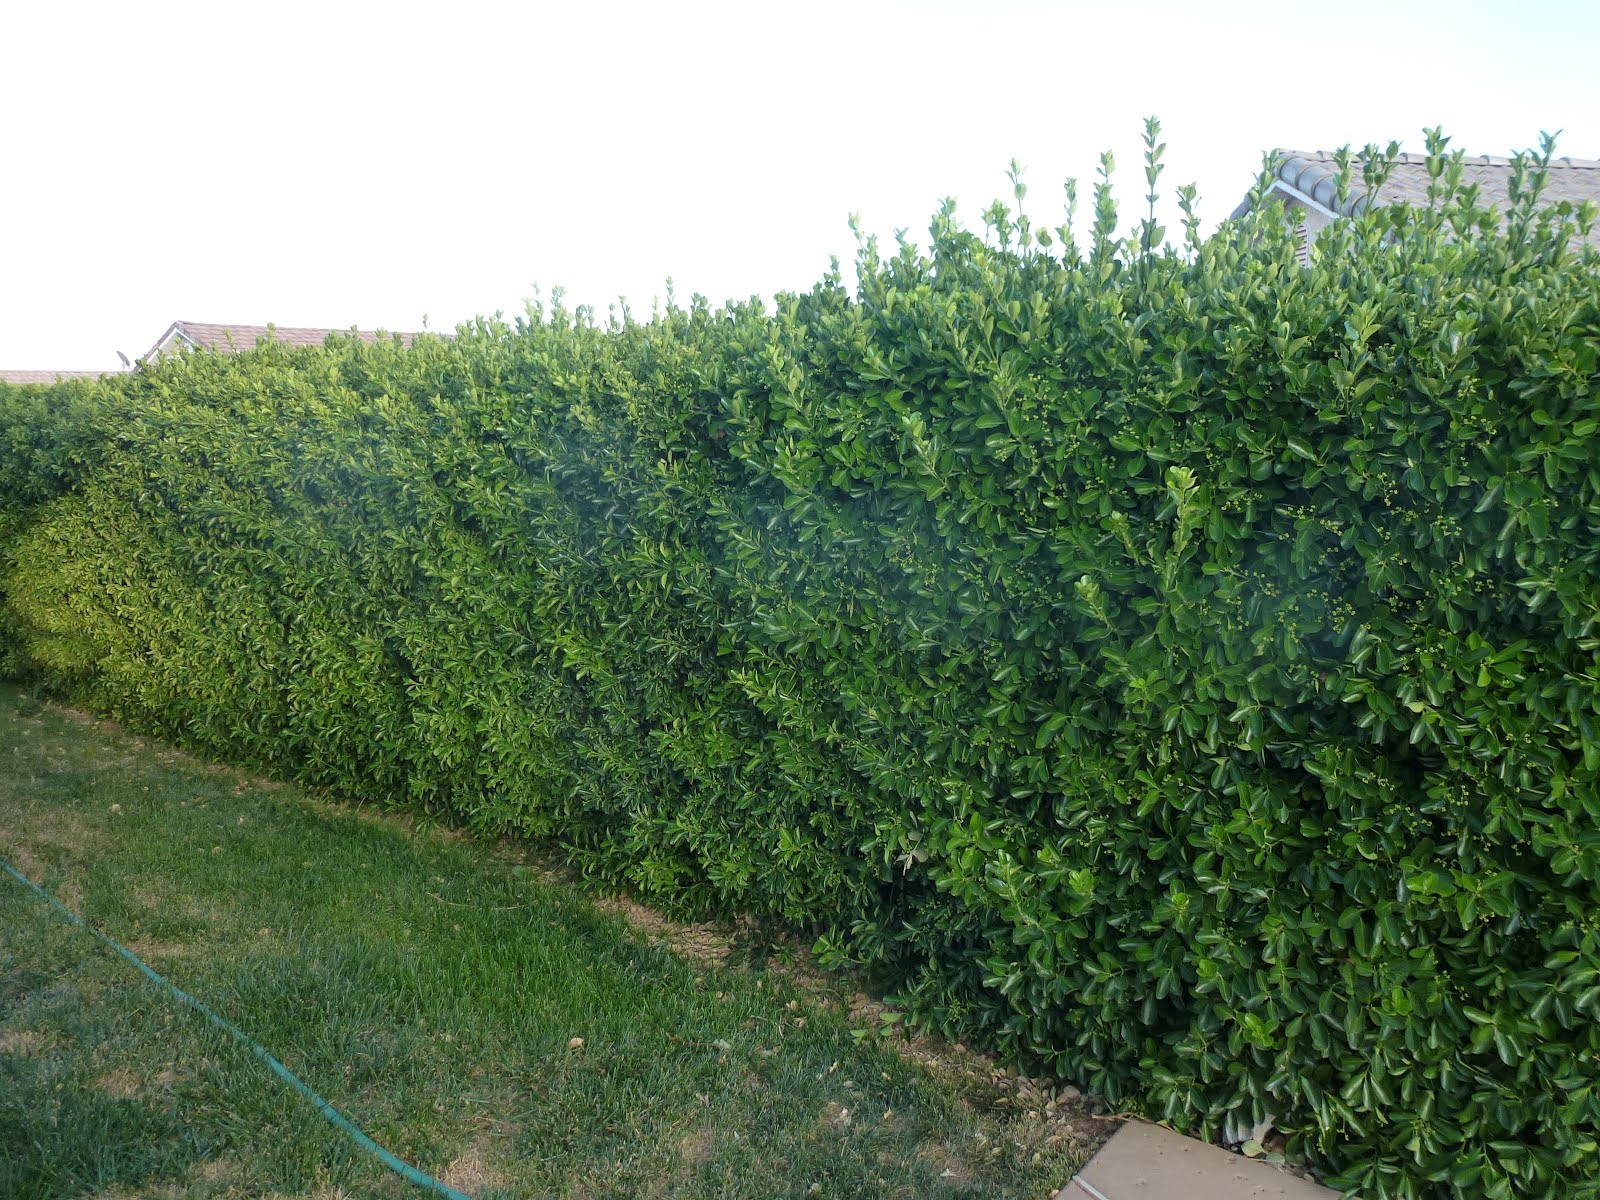 What are some fast-growing privacy hedges?